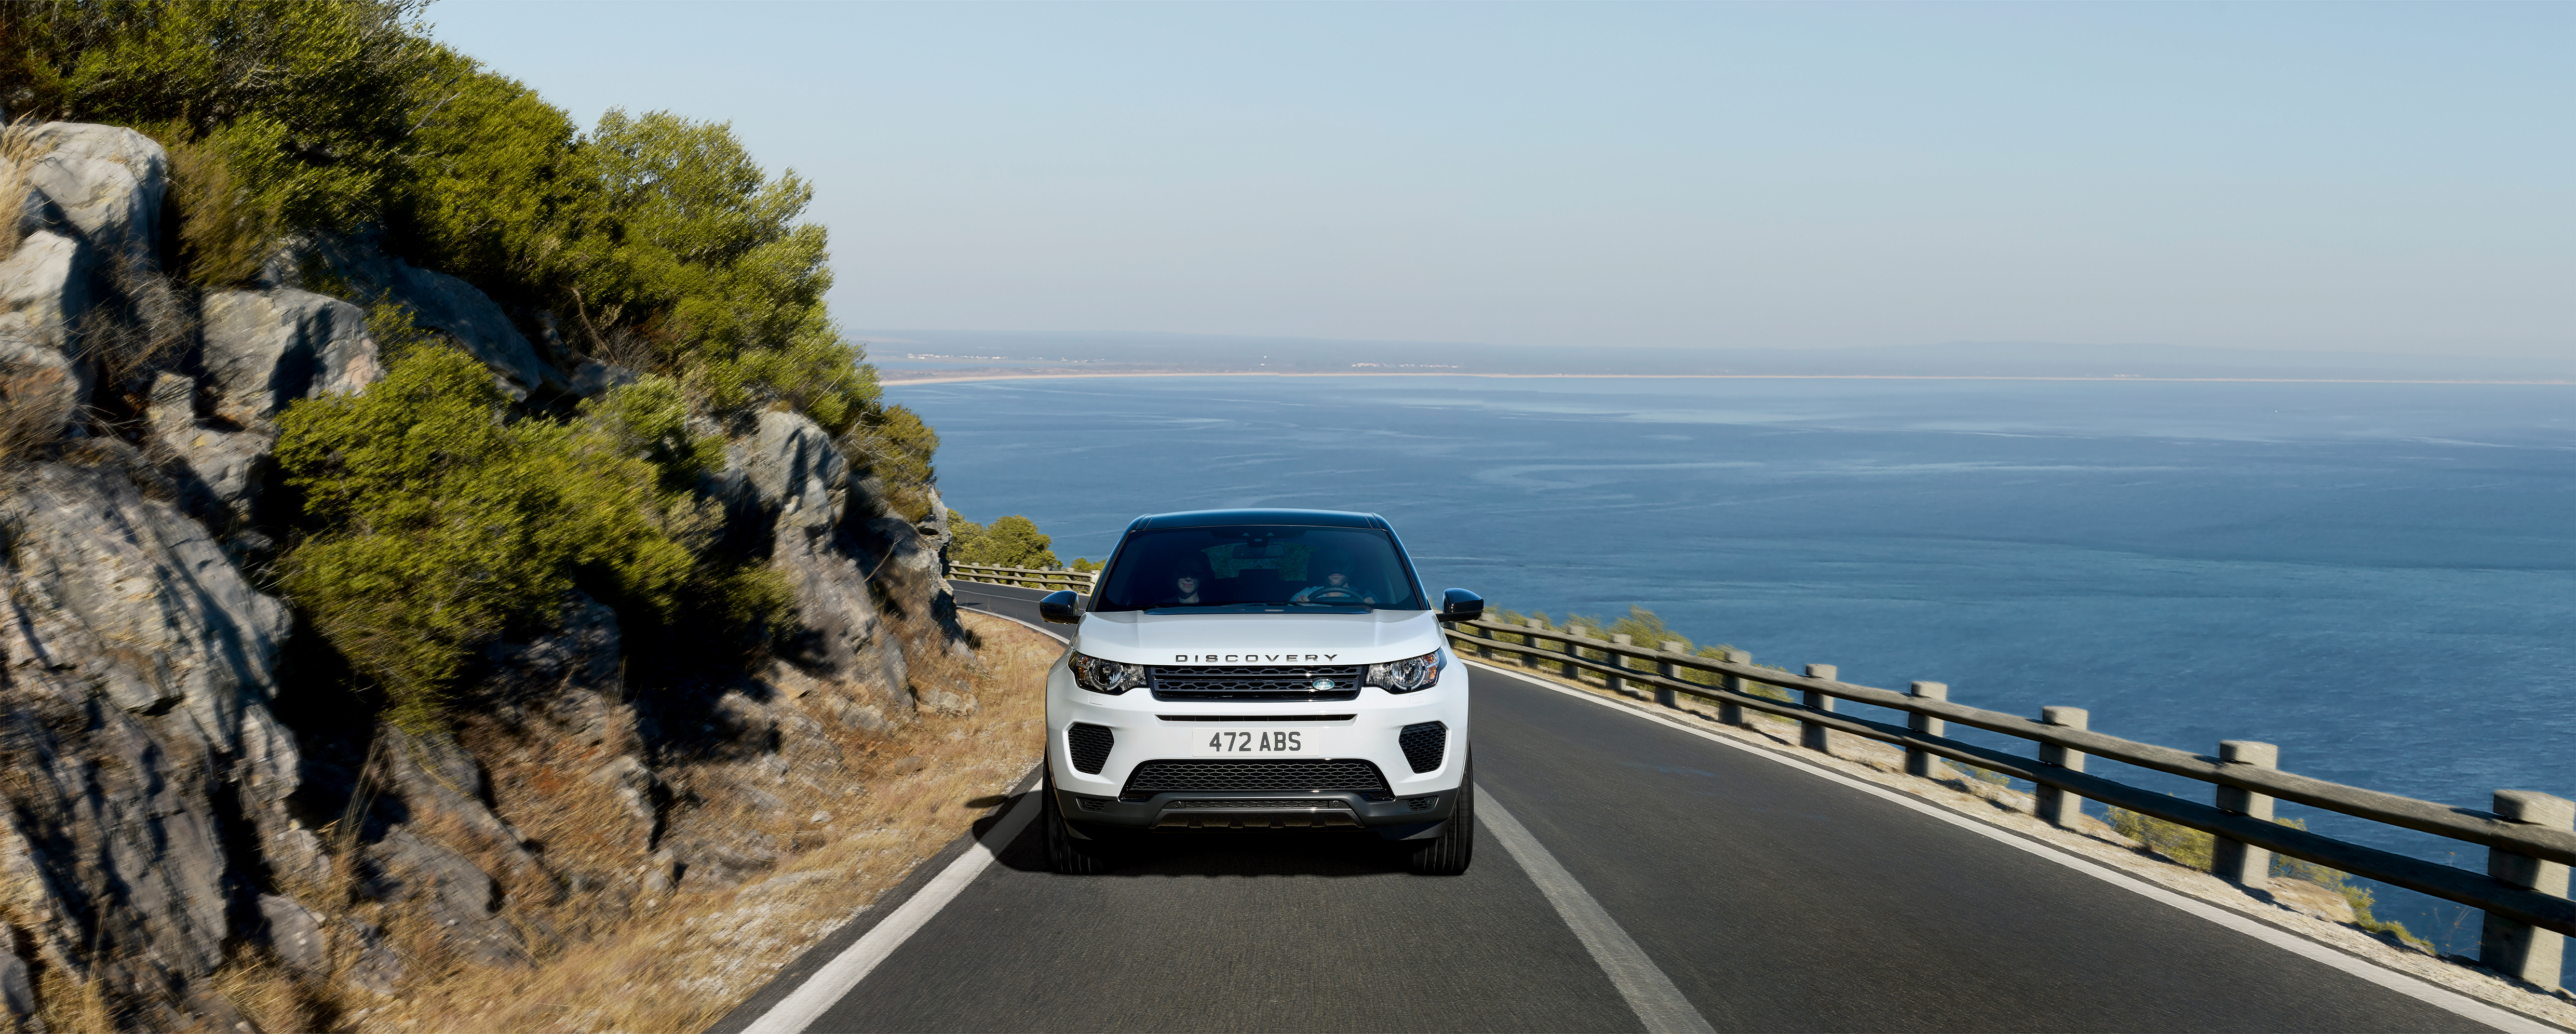 NEW LANDMARK FOR CHART-TOPPING DISCOVERY SPORT